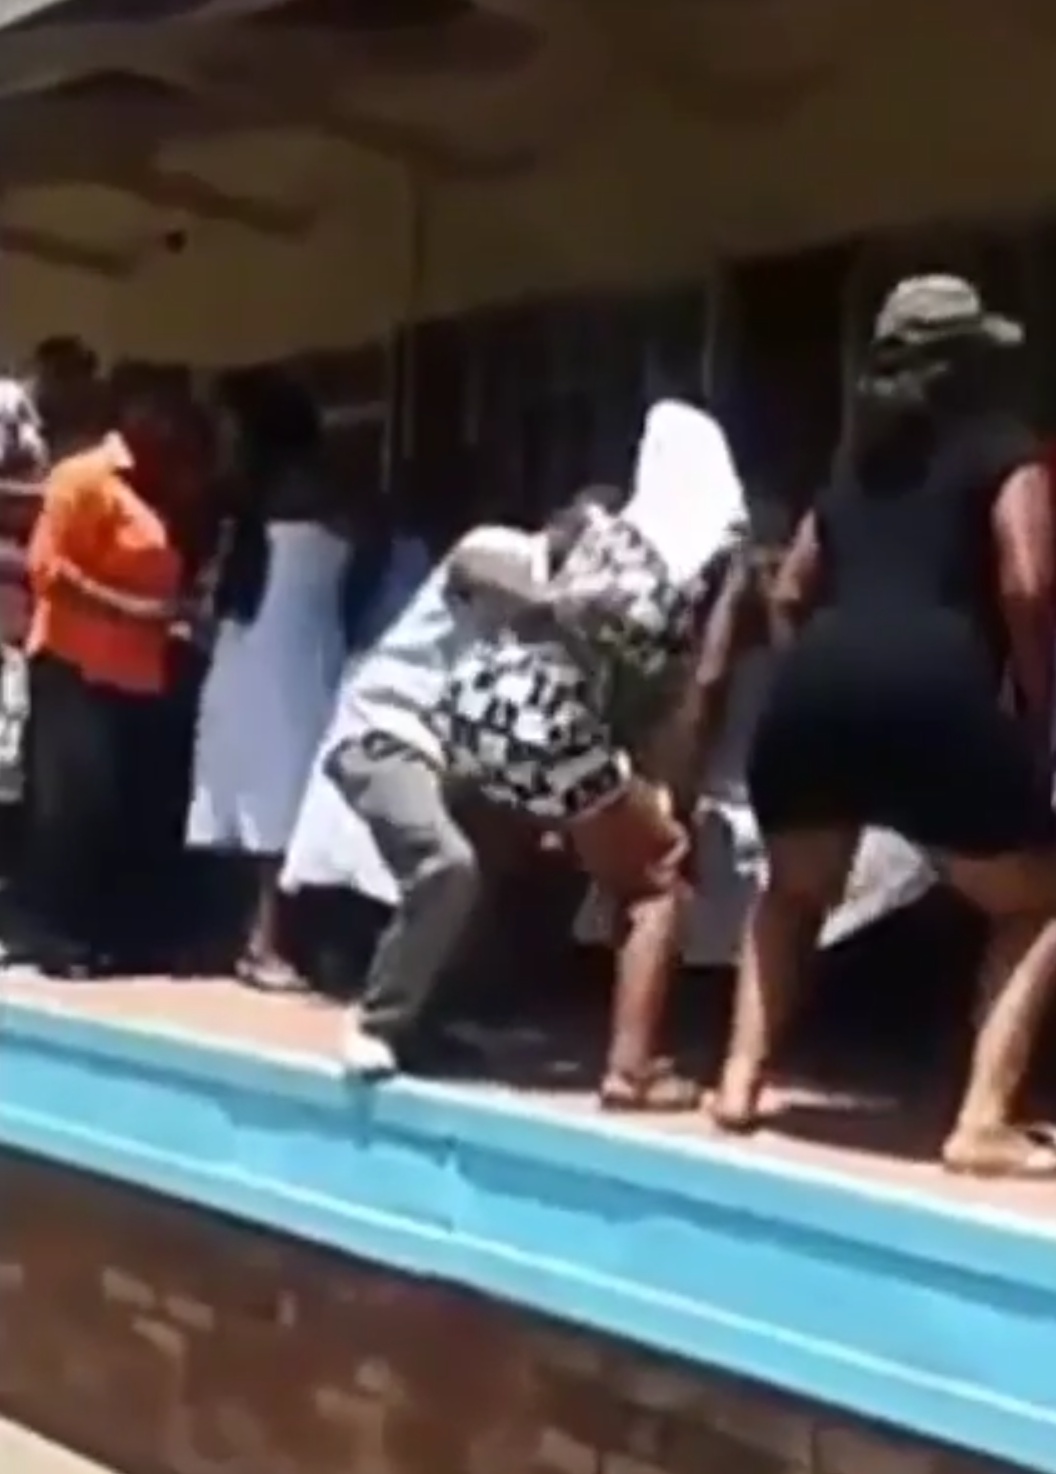 Prostitutes Twerk And Dance At Funeral Of Their Dead Colleague